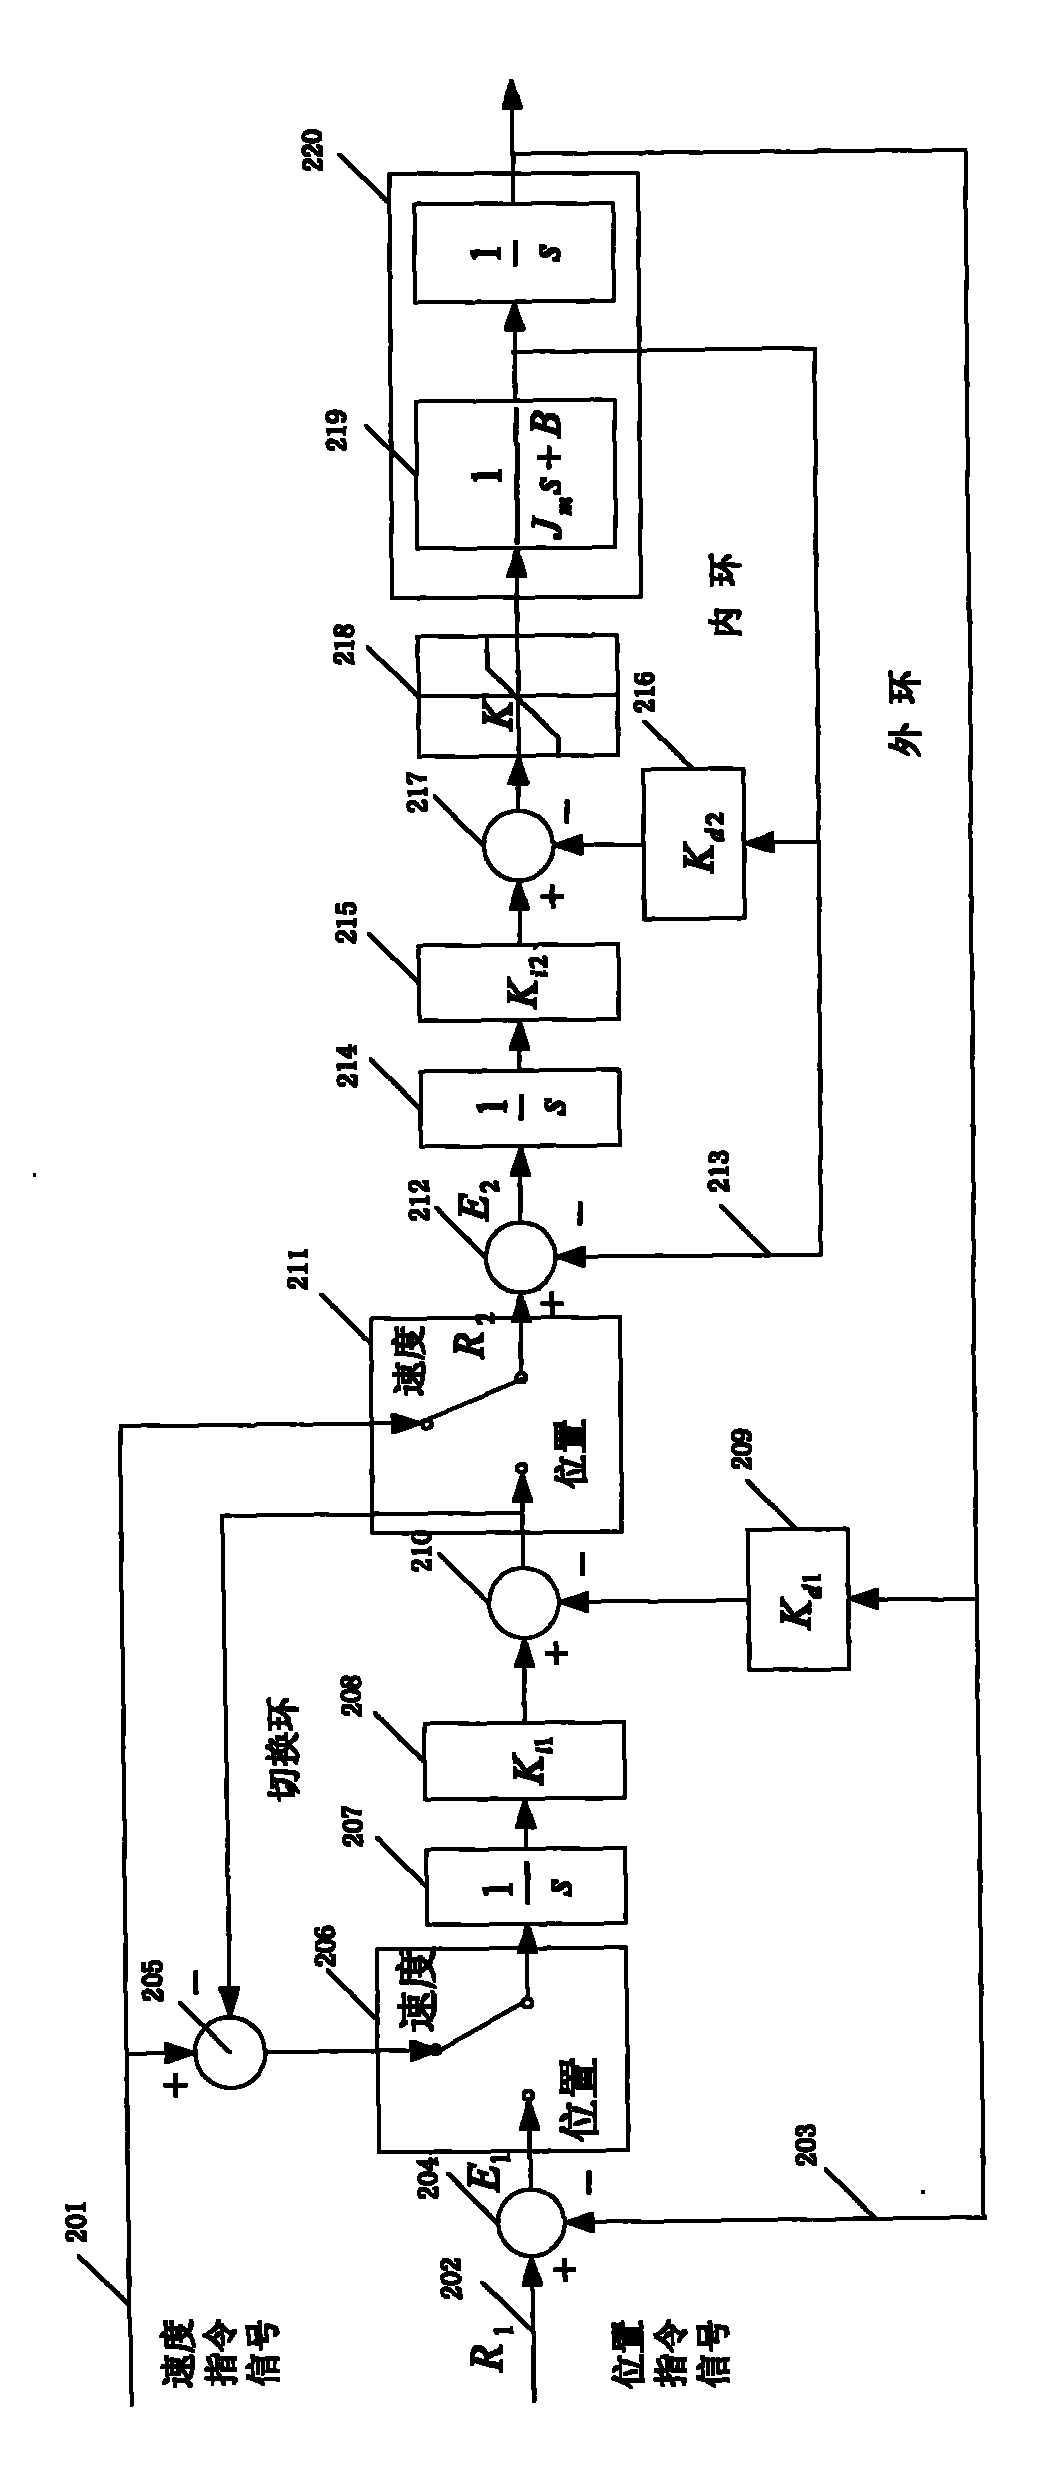 Dc motor controlling system capable of on-line switch over between velocity and position and its switch over method